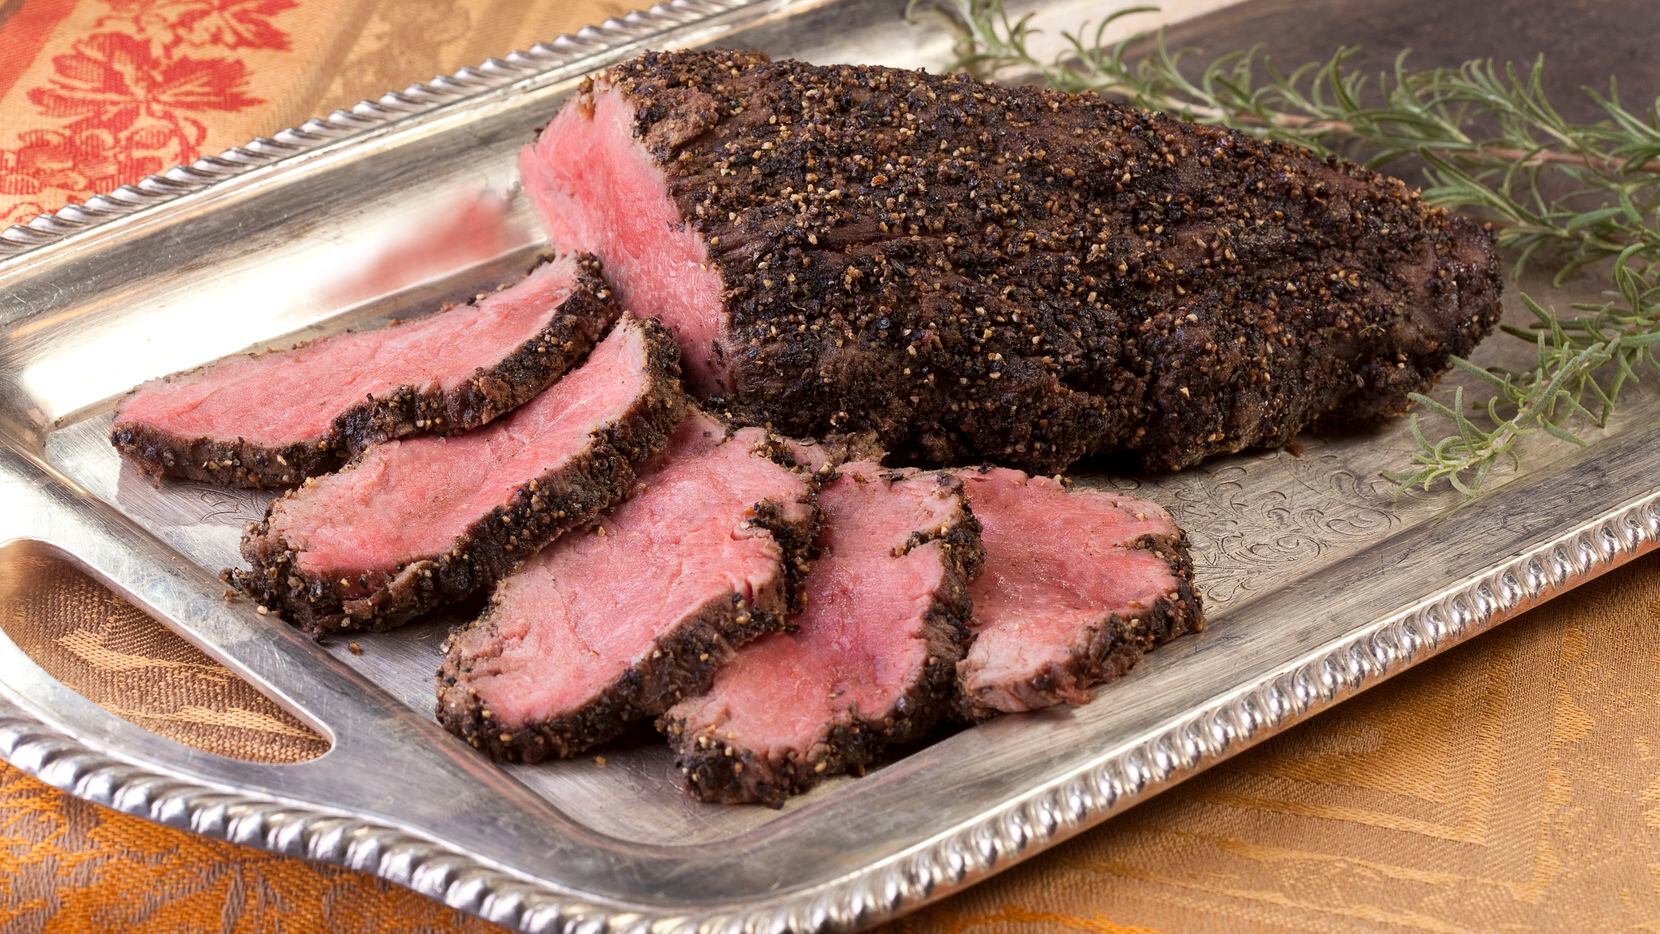 Perini Ranch's mesquite-smoked peppered beef tenderloin is one of Oprah's Favorite Things in...